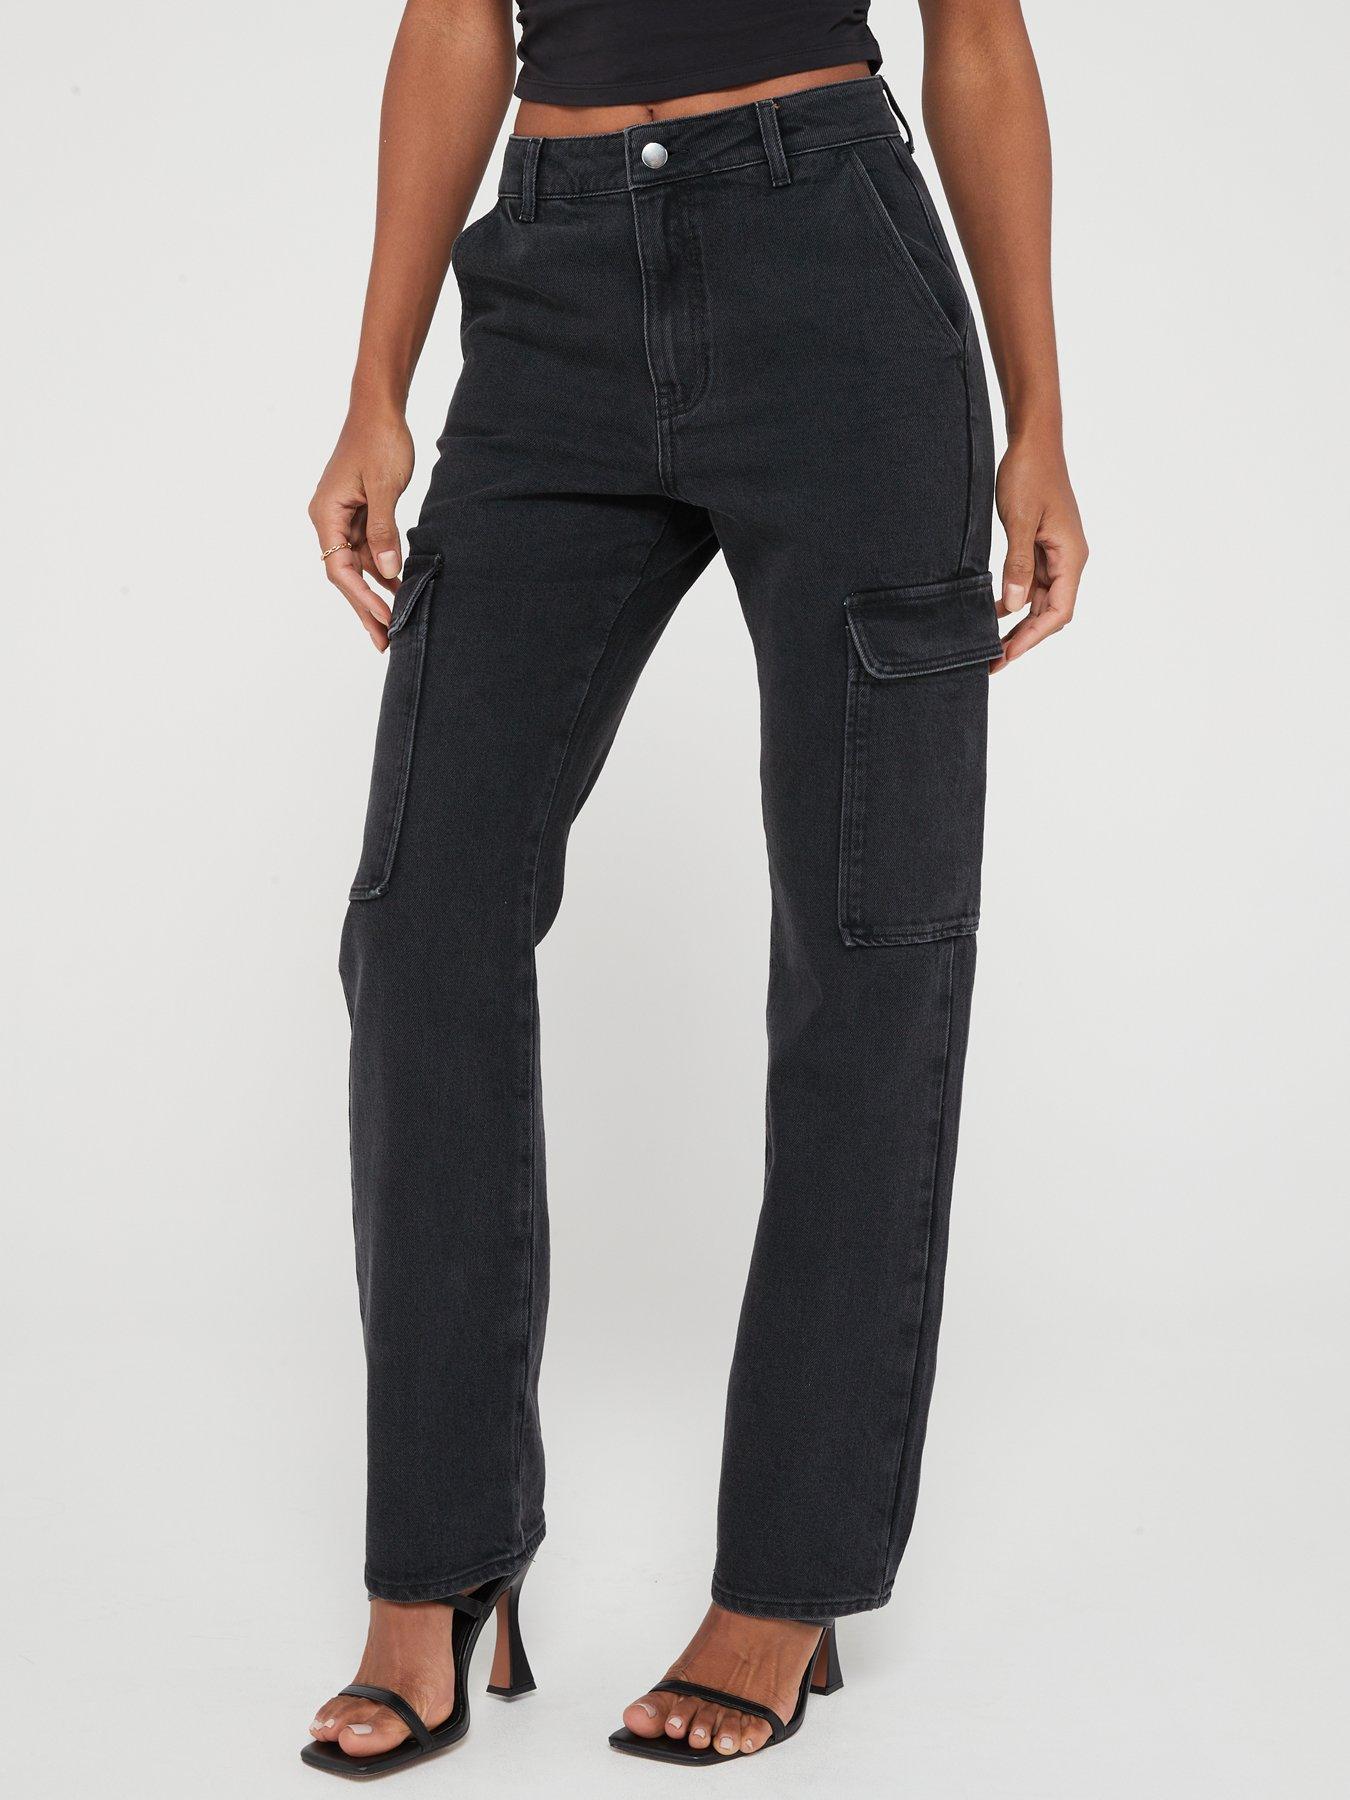 High Waisted Jeans | Women's Jeans | Very Ireland